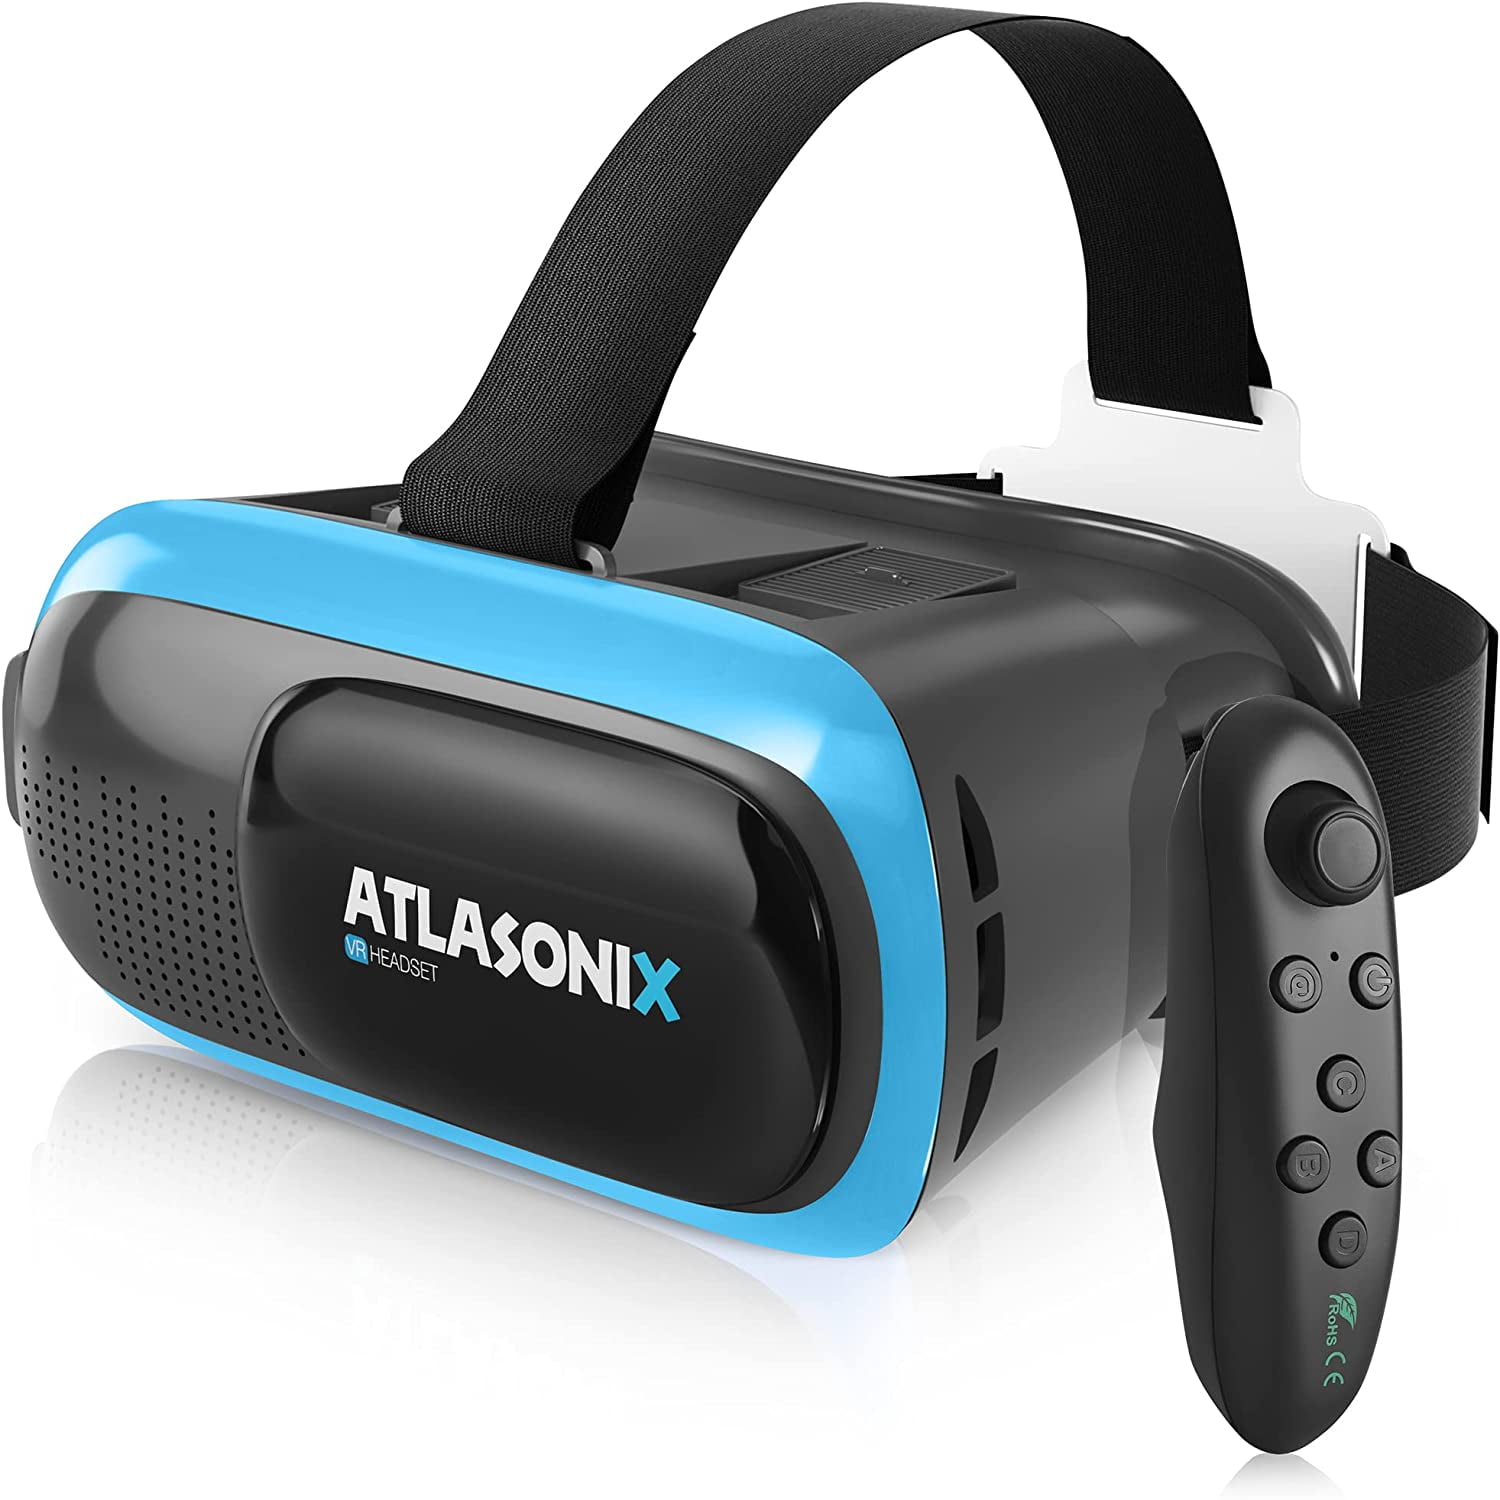 tårn Bage Agent Atlasonix VR Headset with Remote Control | Virtual Reality Goggles for  iPhone & Android | HD | 3D Glasses for Gaming and Movies | Comfortable and  Adjustable VR Box | Blue - Walmart.com